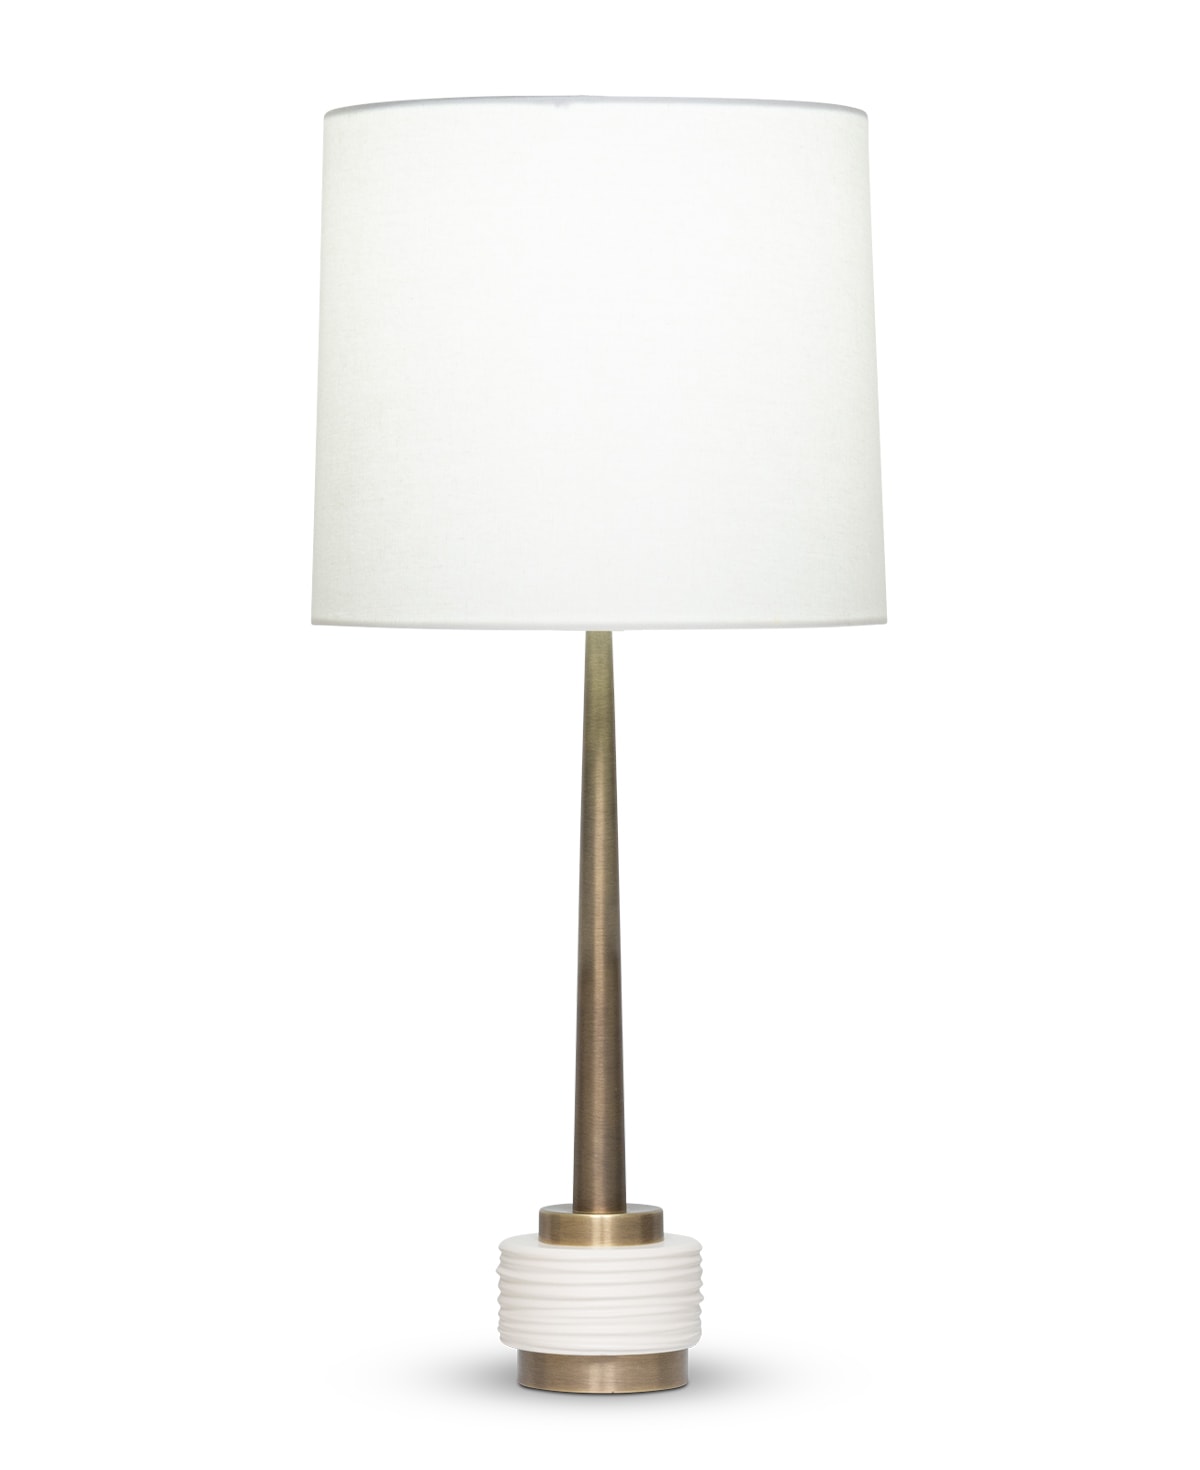 FlowDecor Weiss Table Lamp in metal with antique brass finish and resin with off-white matte finish and off-white linen tapered drum shade (# 4556)